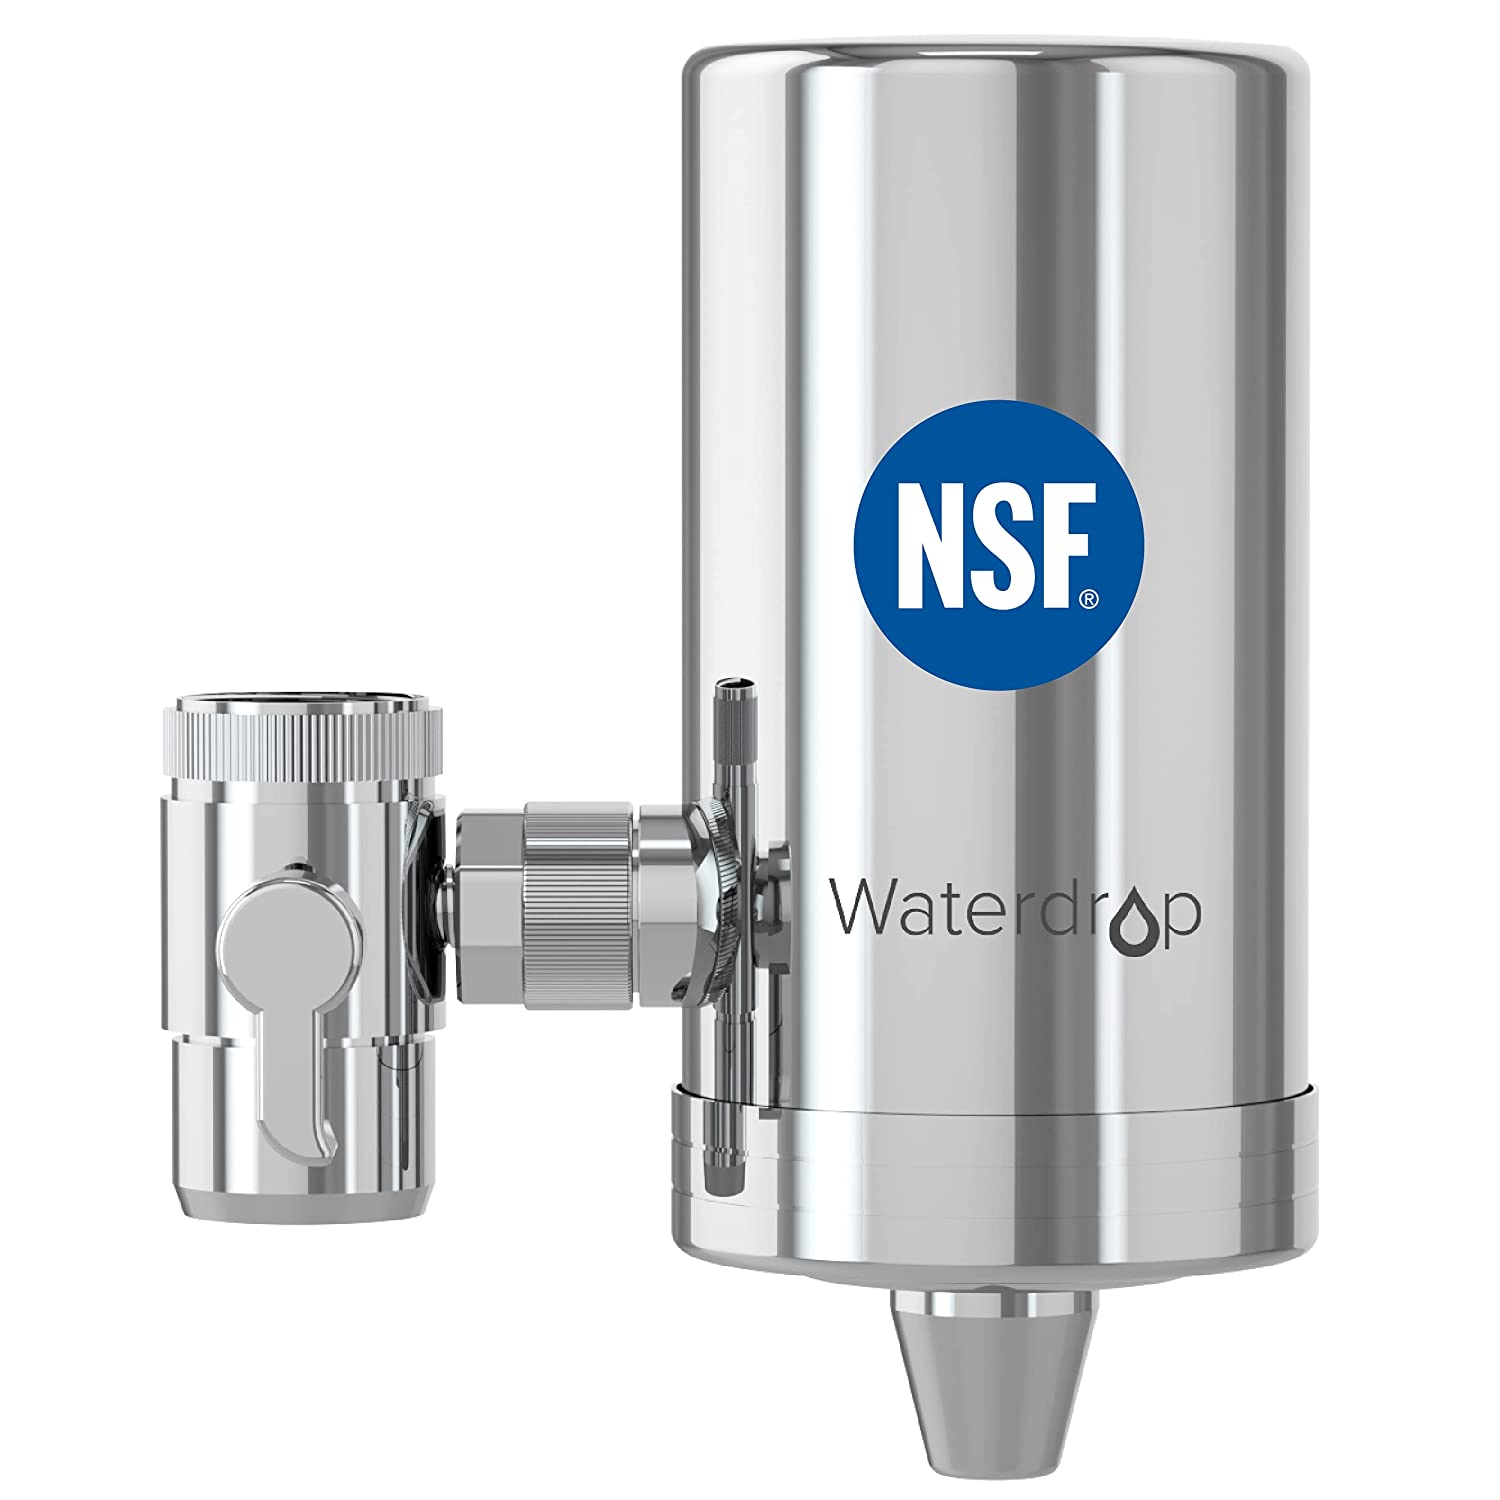 Waterdrop wd fc 06 water faucet filtration system